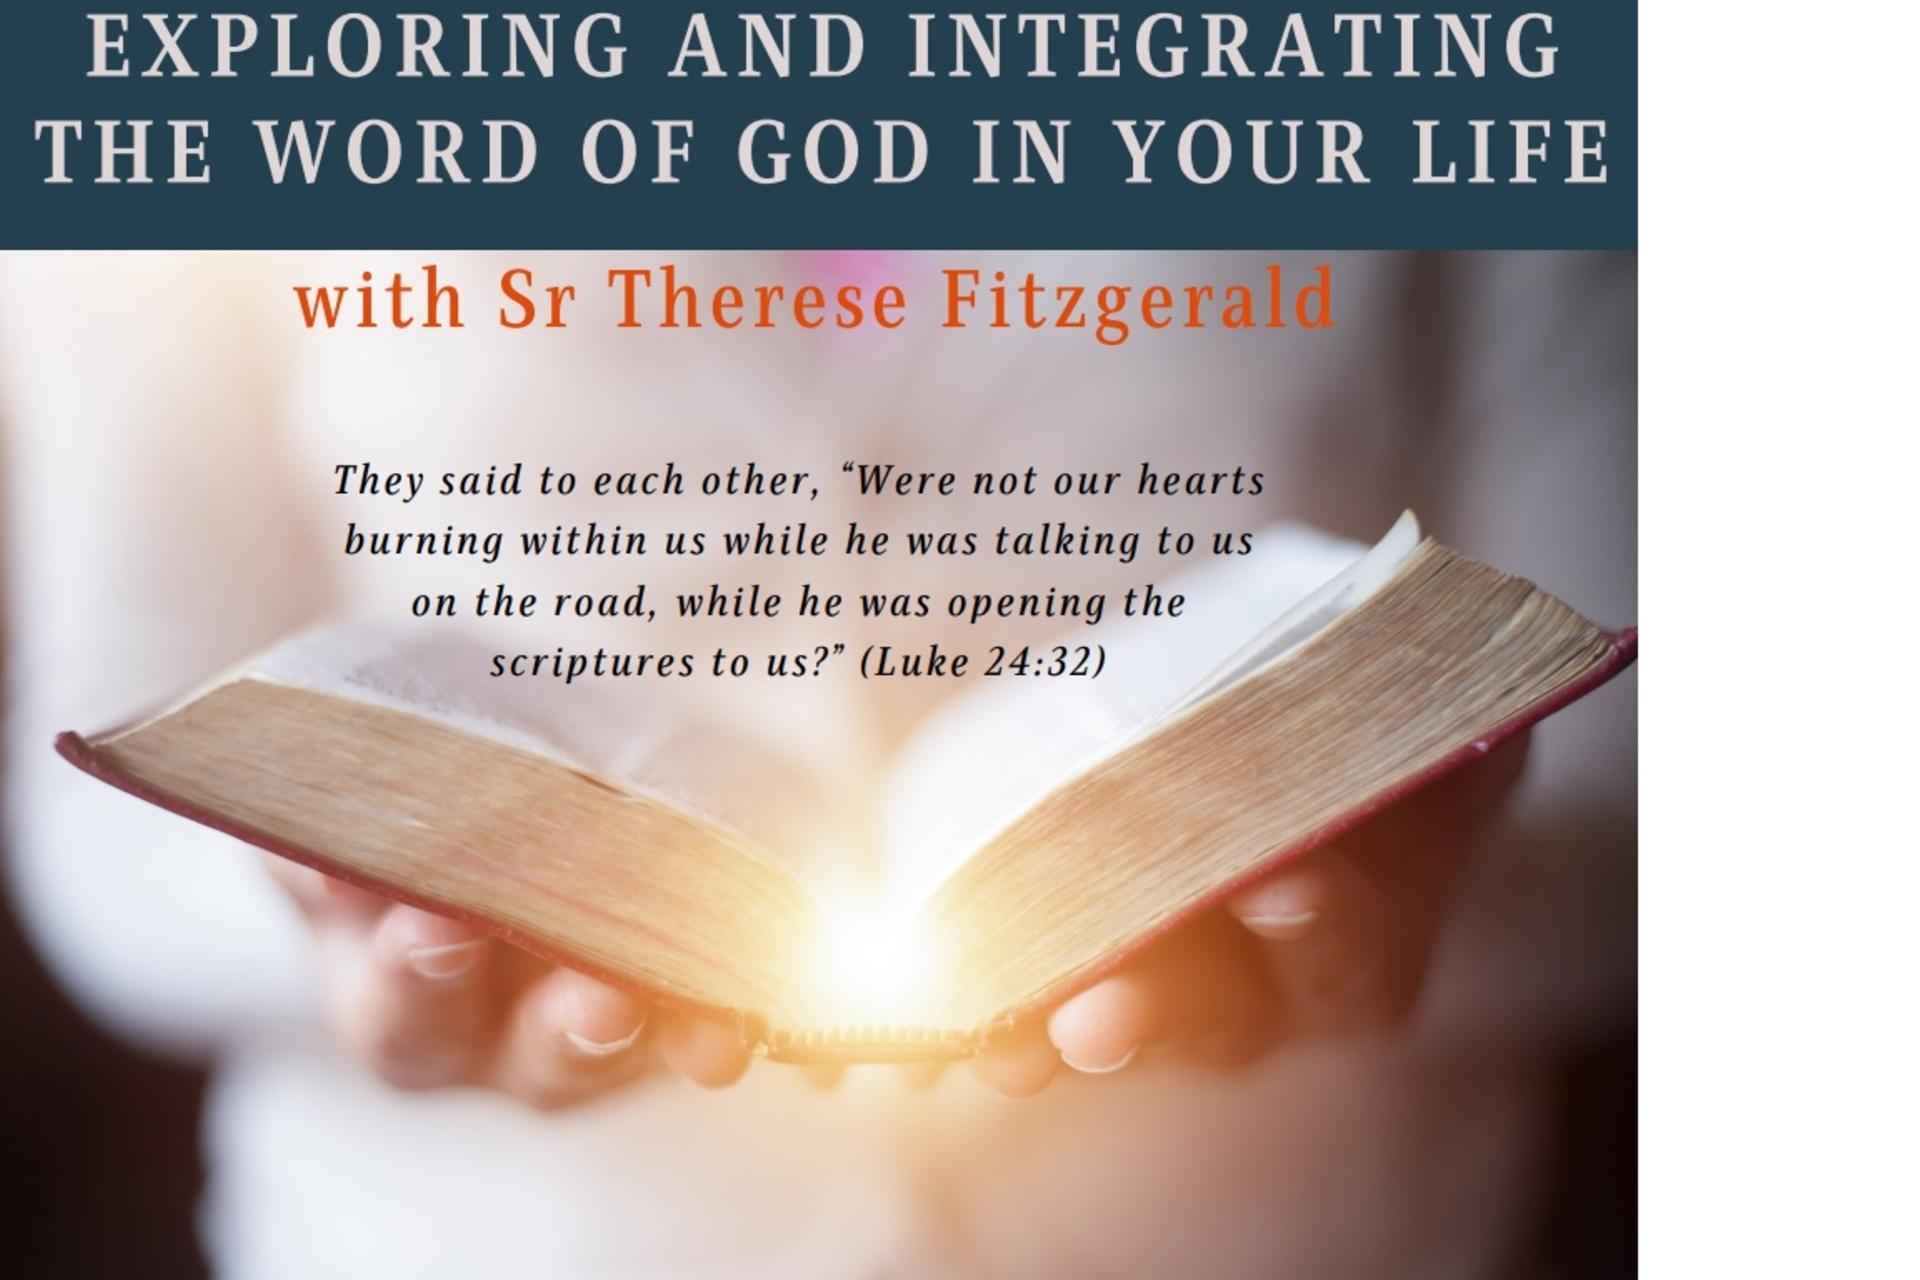 Exploring the Word with Sr. Therese Fitzgerald